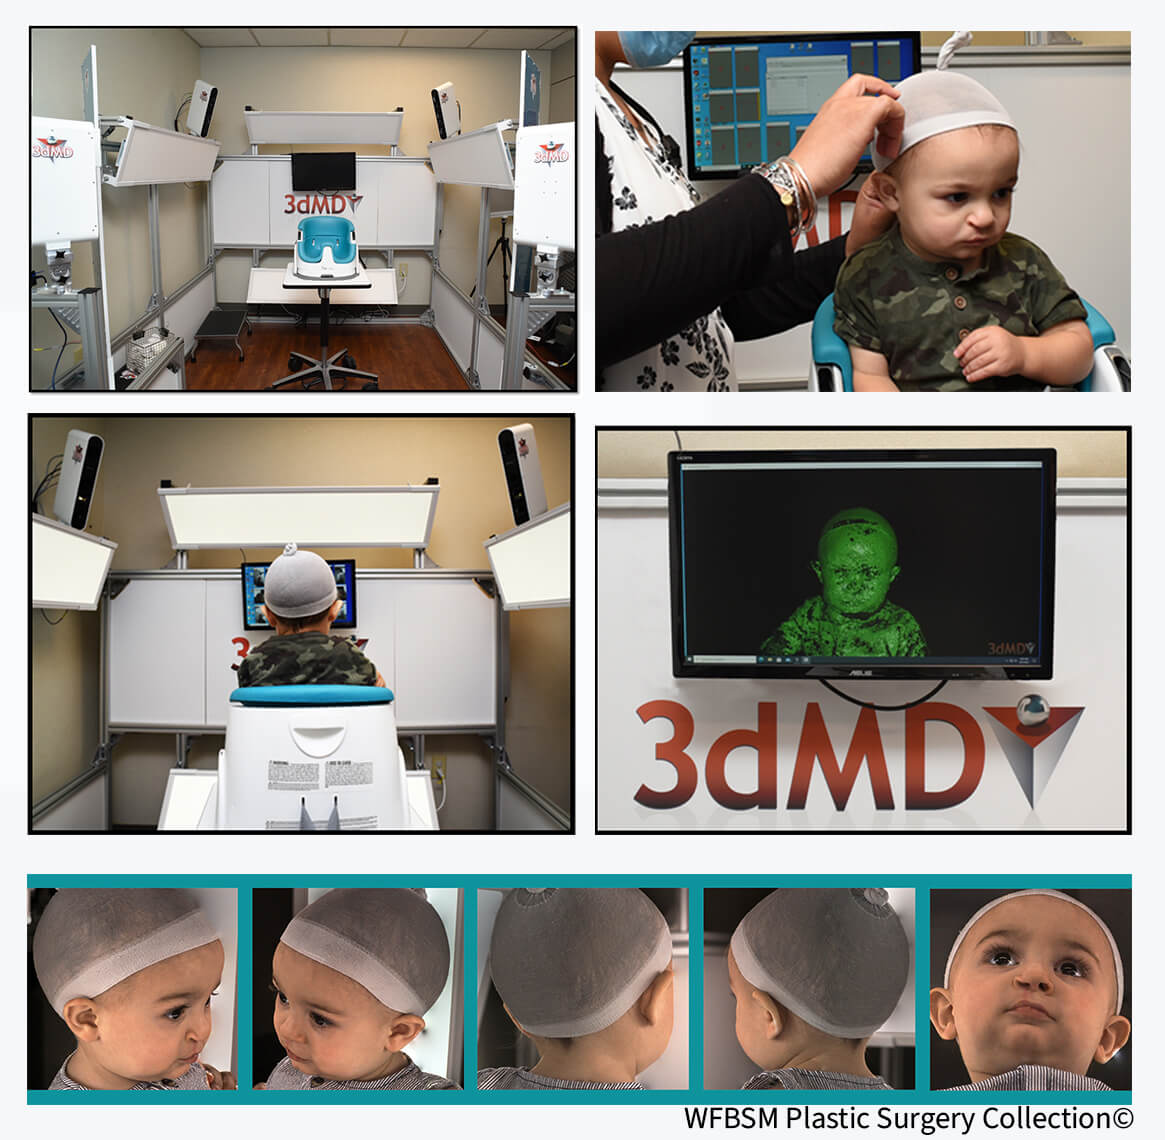 A graphic featuring images of children undergoing the 3DMD process and equipment used in said process.